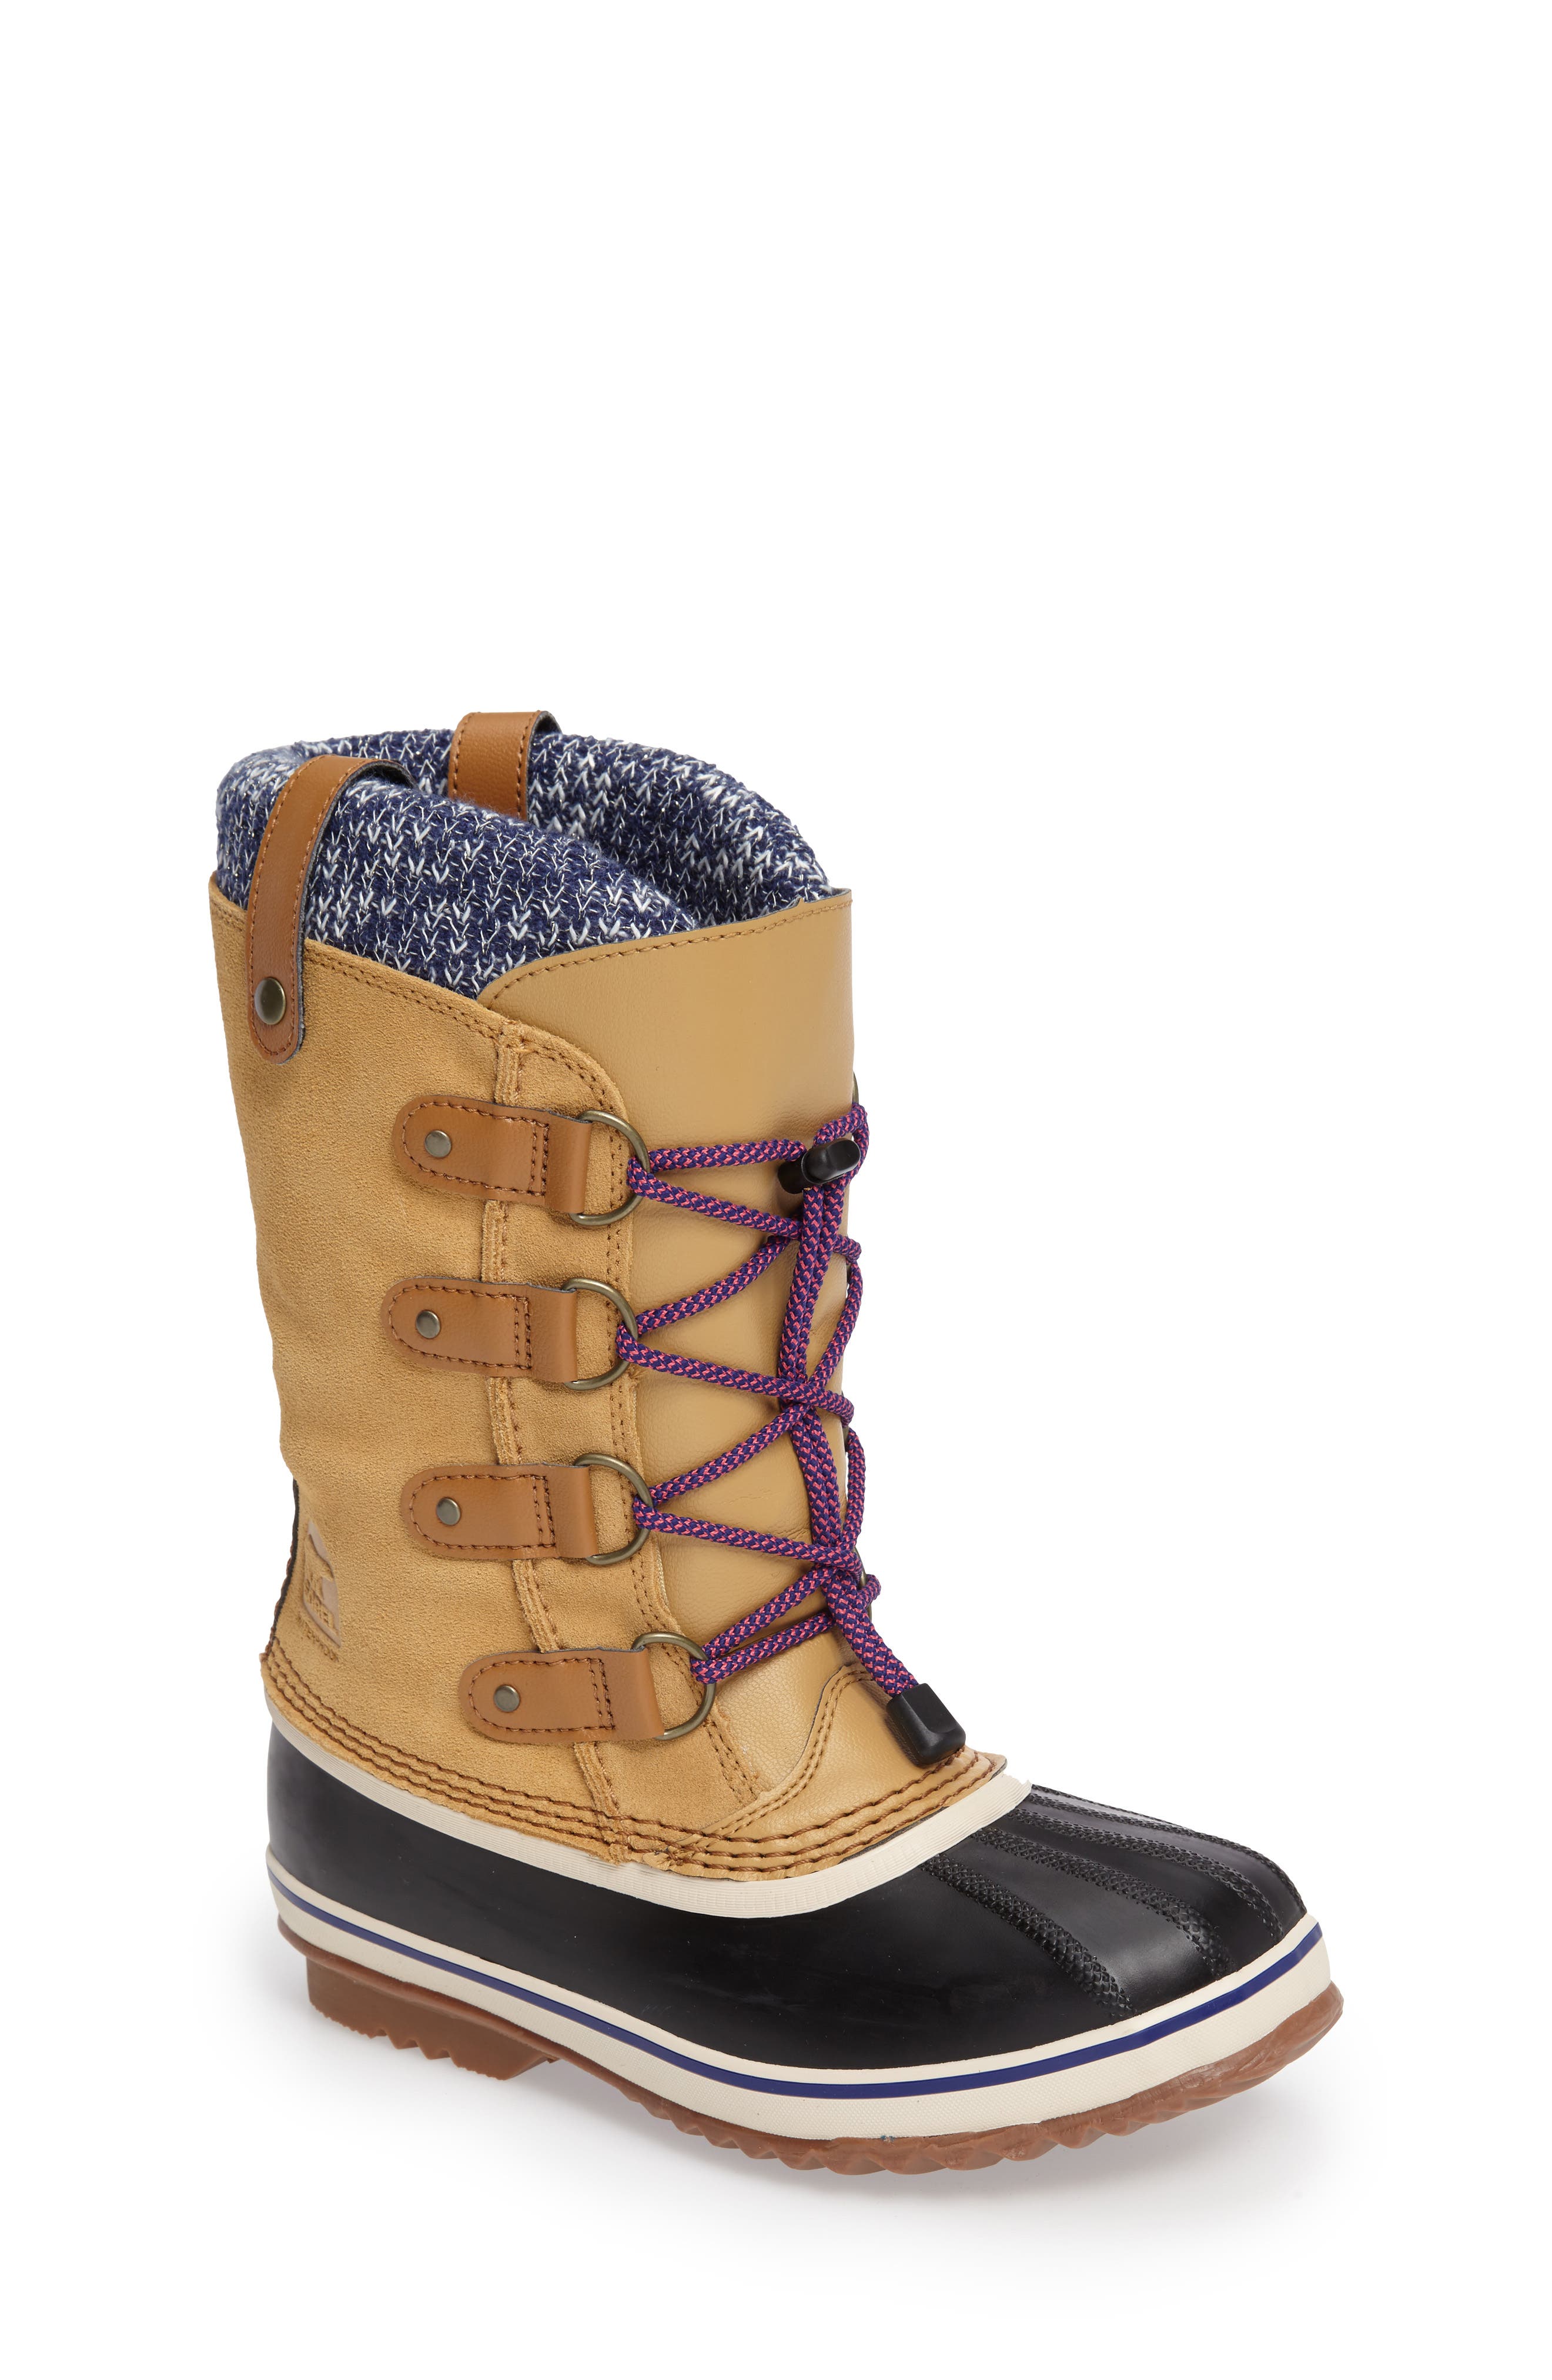 joan of arctic knit boot